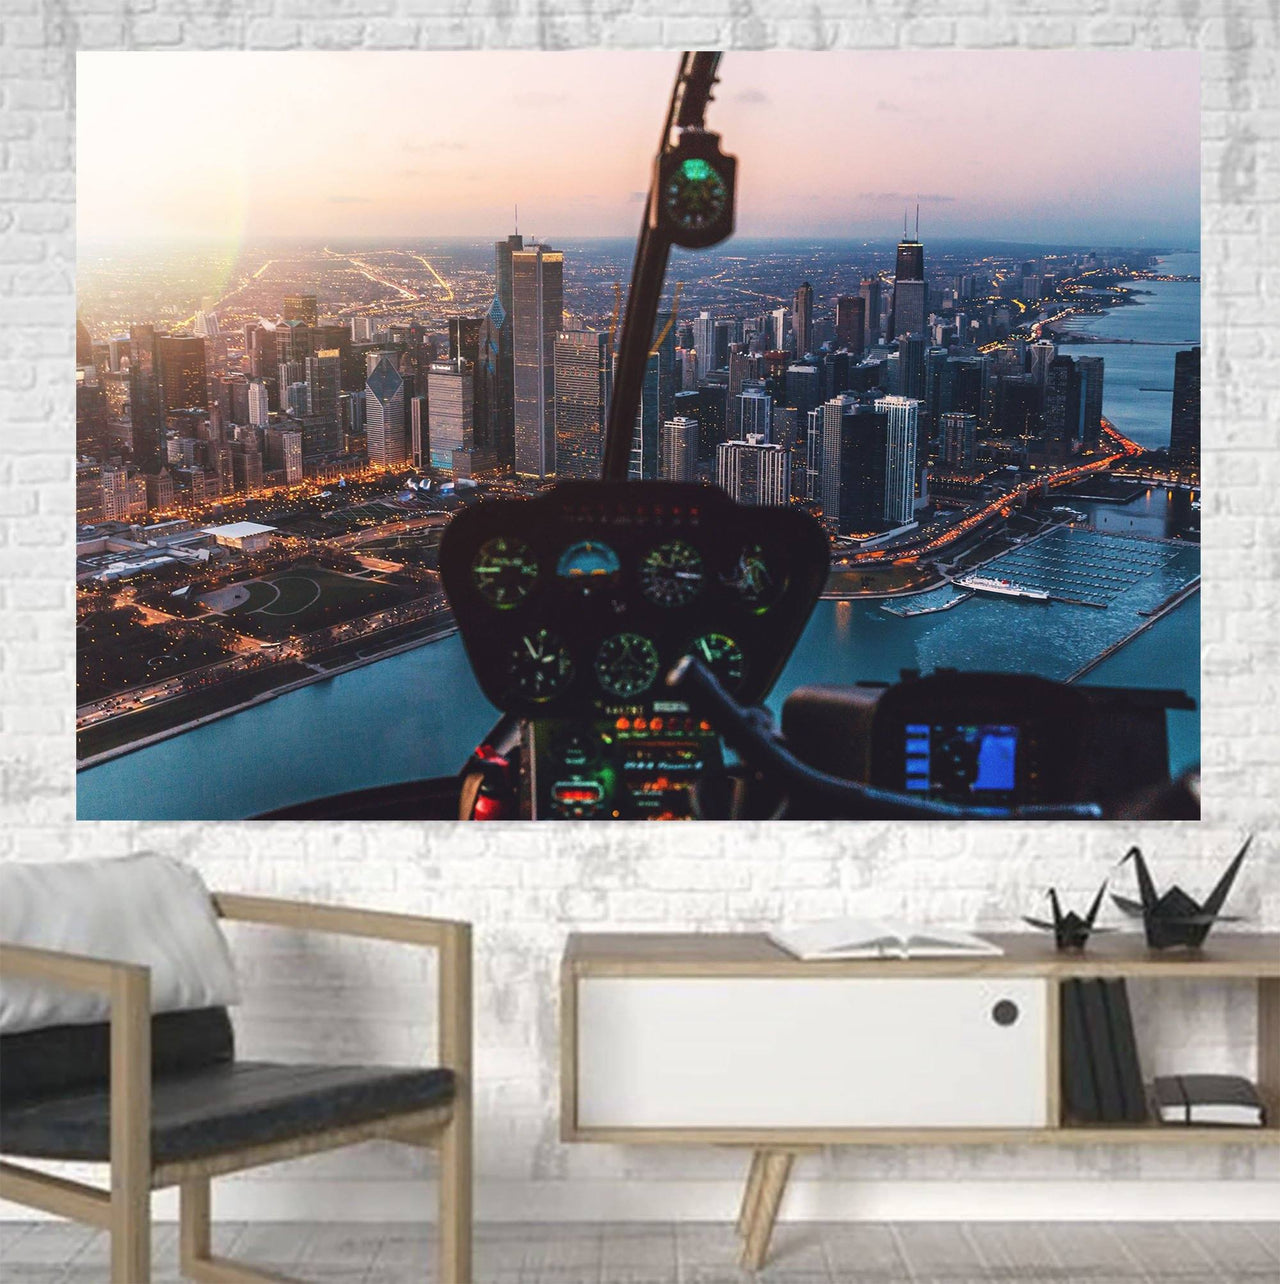 Amazing City View from Helicopter Cockpit Printed Canvas Posters (1 Piece) Aviation Shop 